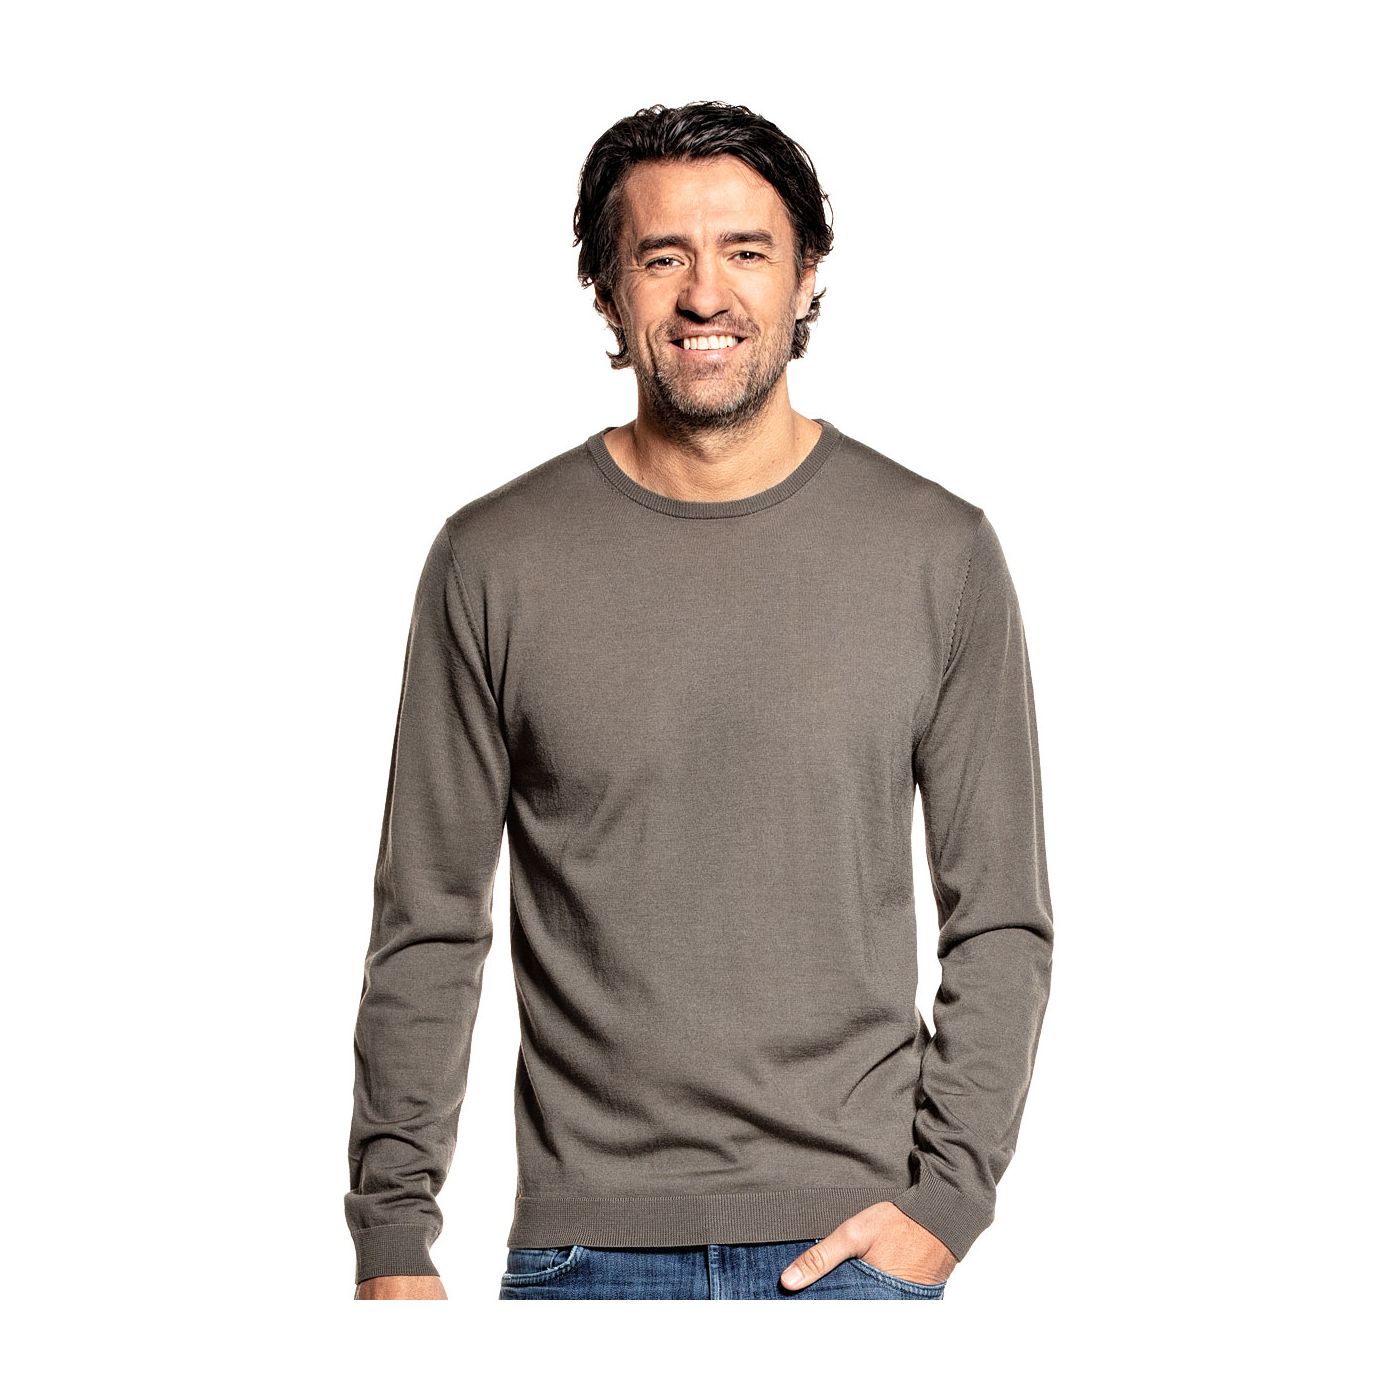 Crew neck sweater for men made of Merino wool in Green